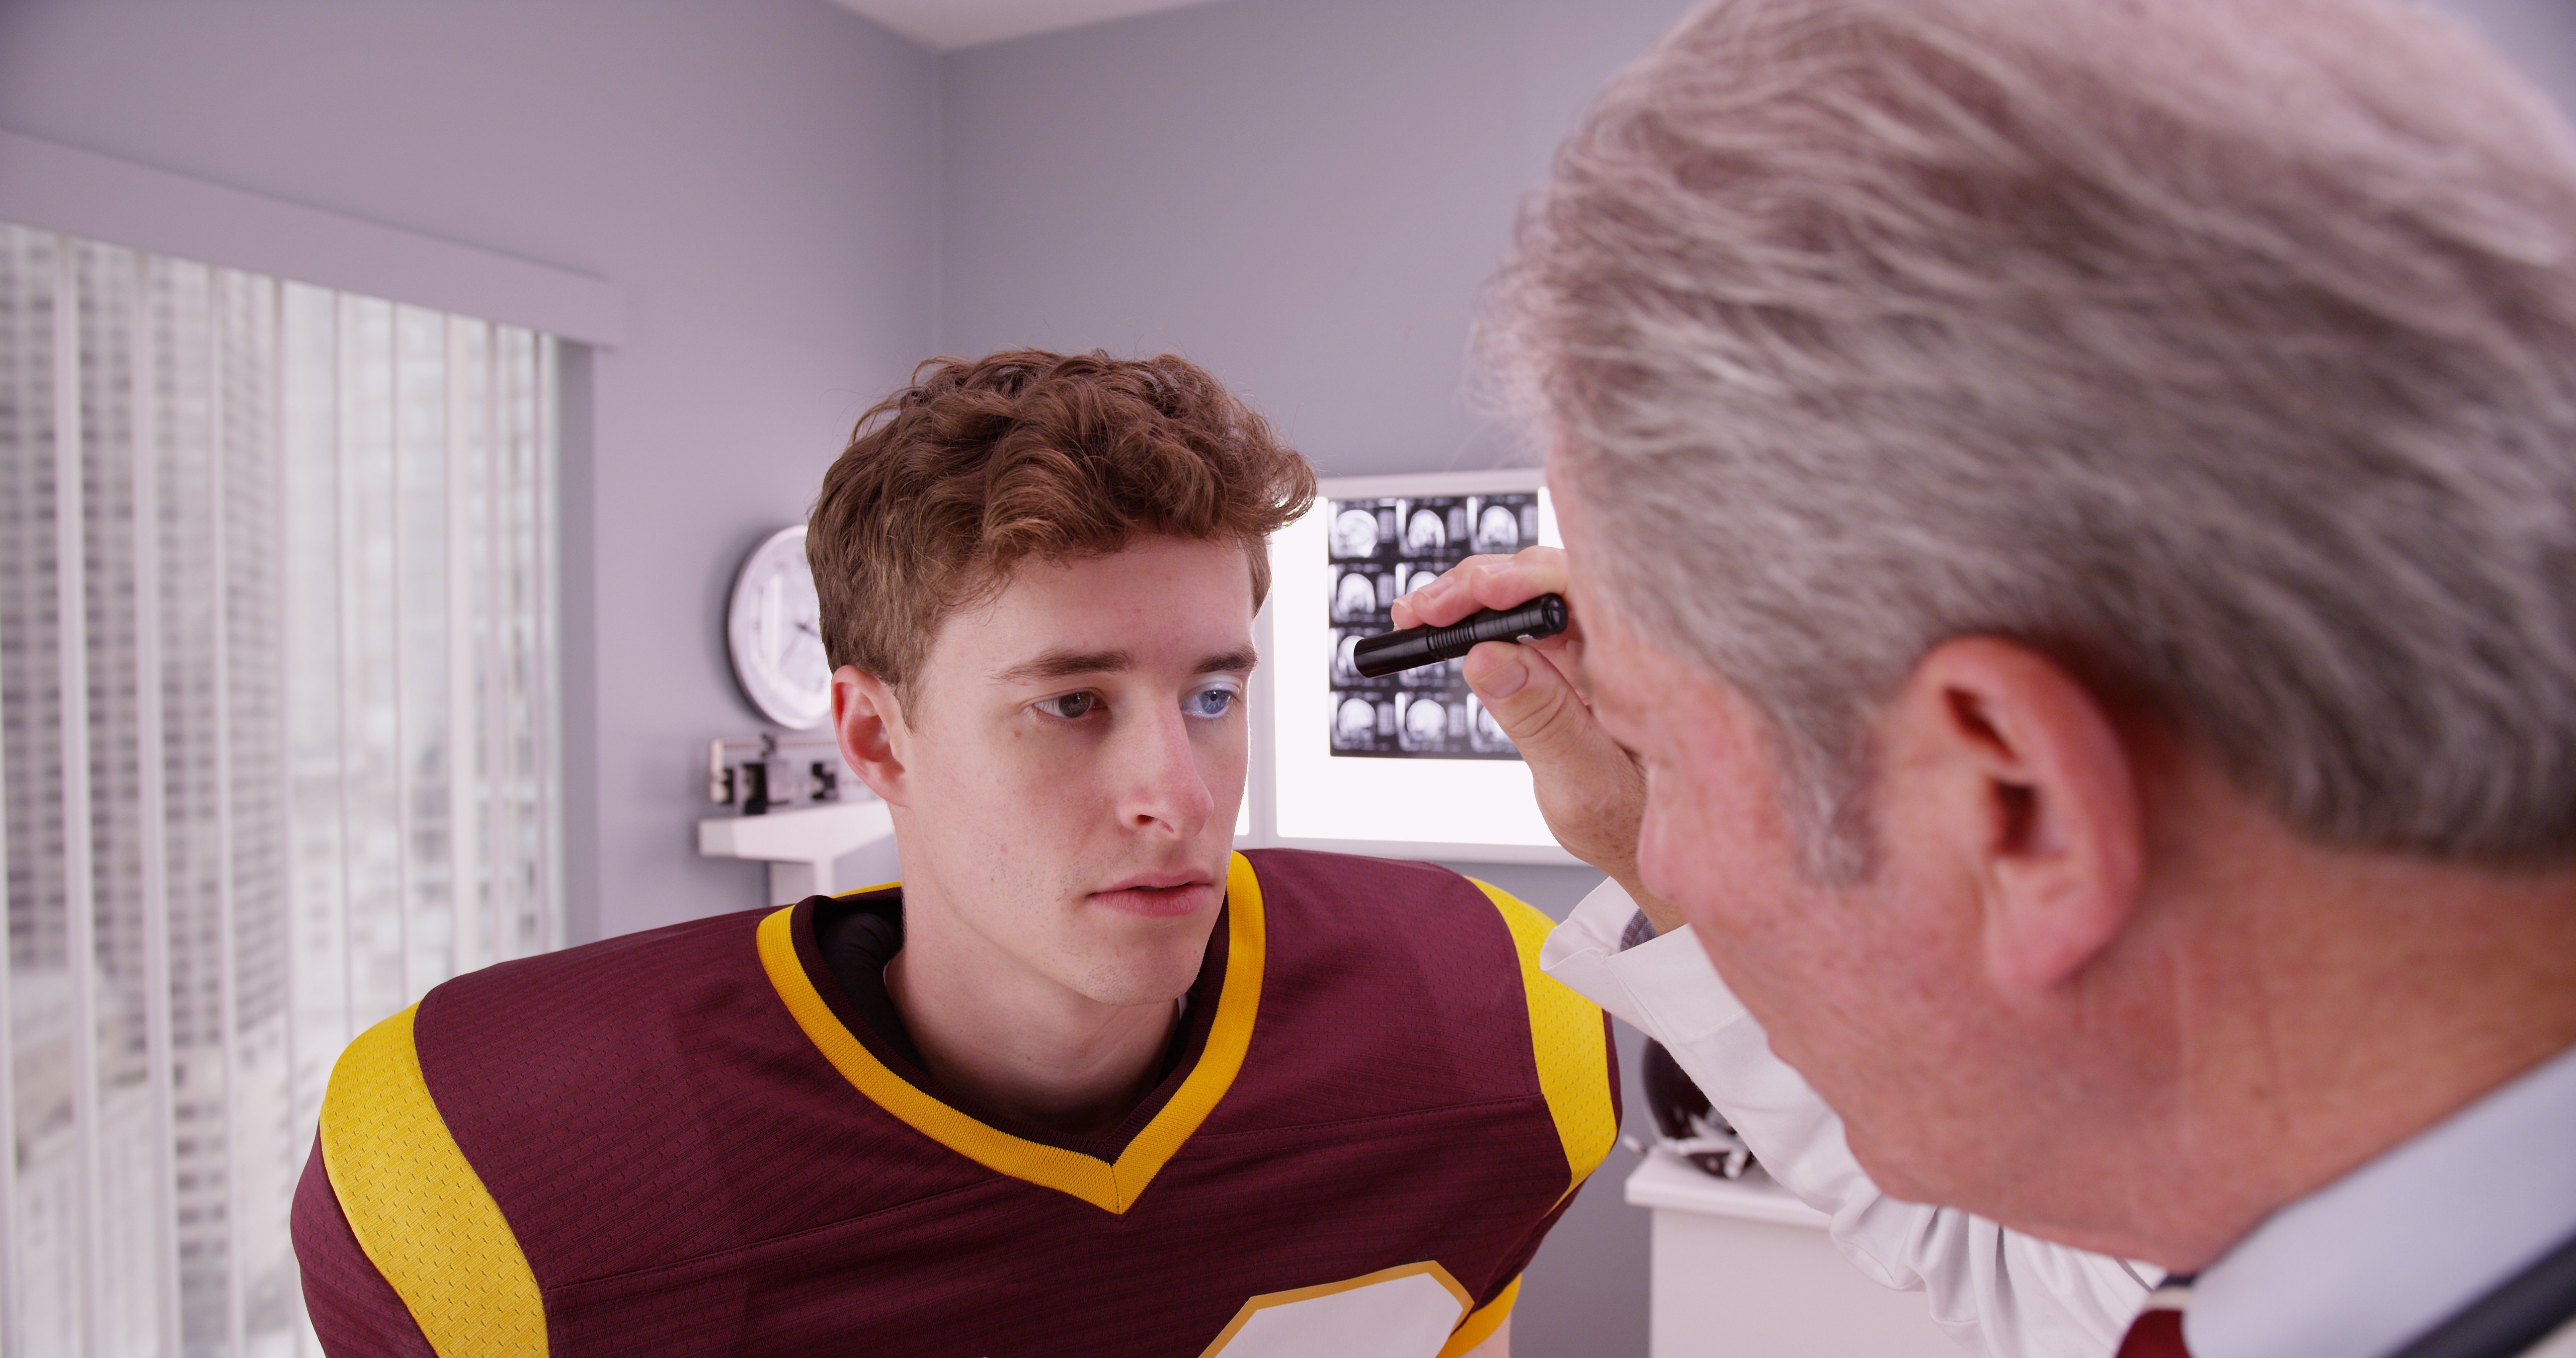 storyblocks-mid-aged-doctor-examining-football-player-after-concussion_B04bXlpja_m